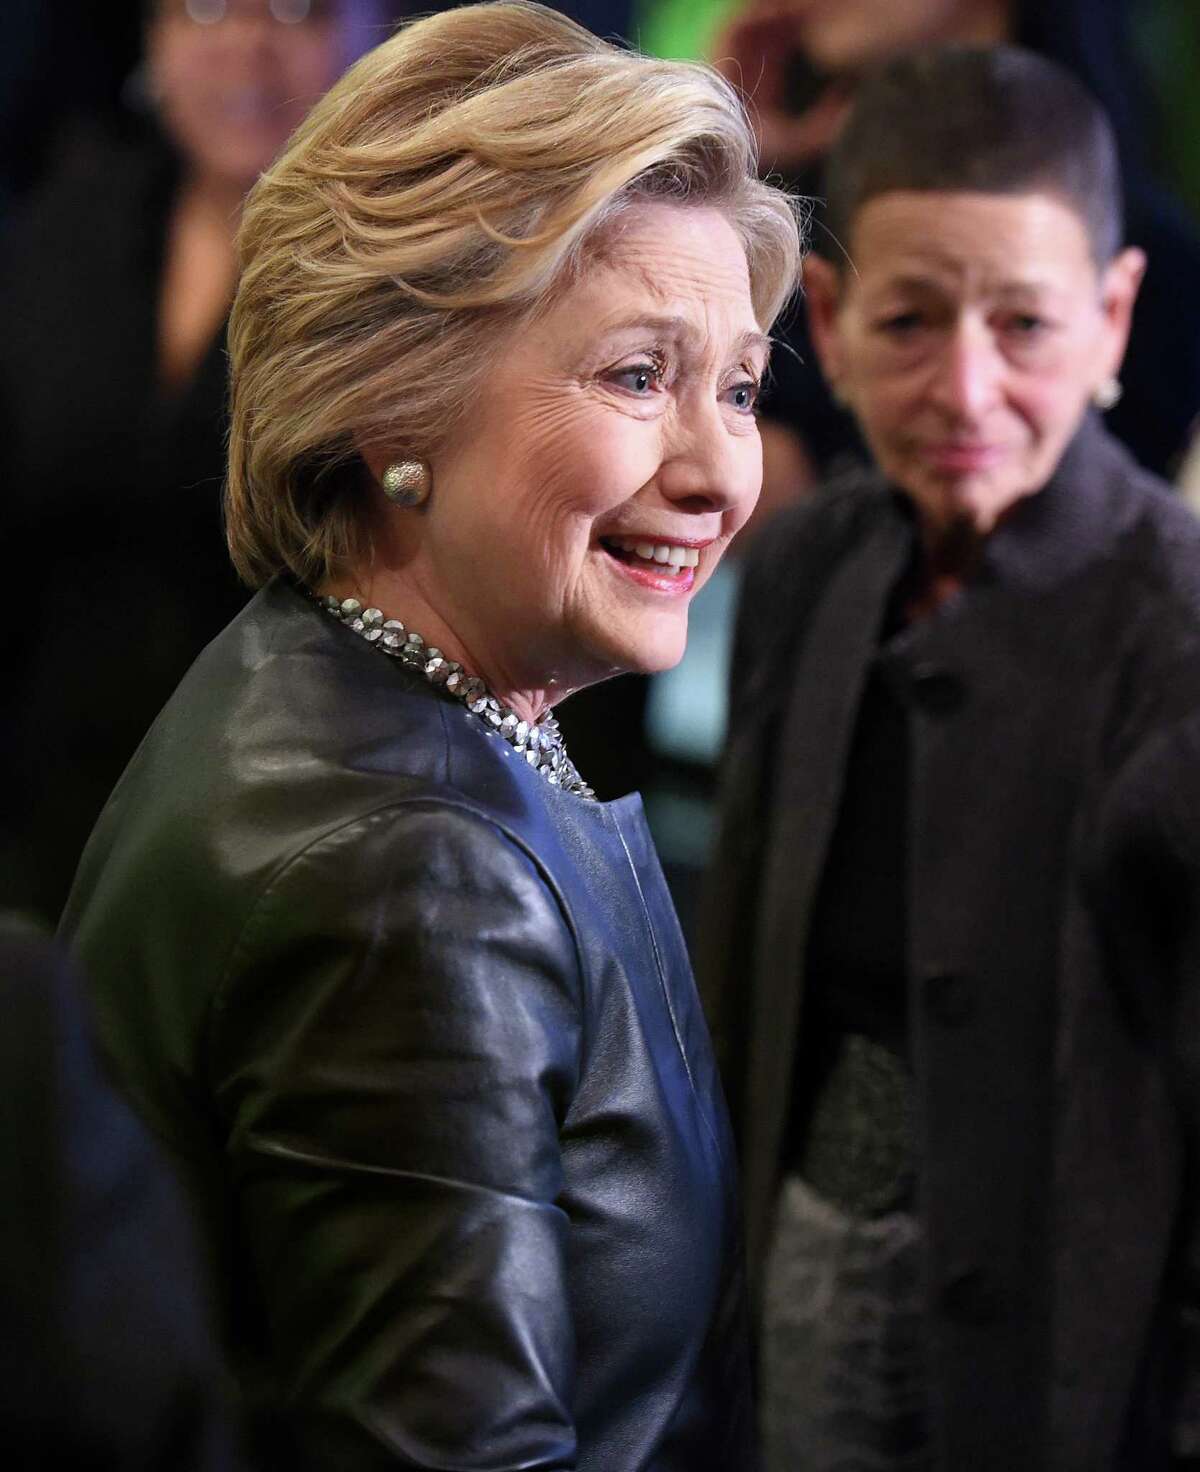 (Arnold Gold-New Haven Register) Democratic presidential candidate Hillary Clinton (center) arrives at a campaign stop at Orangeside on Temple in New Haven, Connecticut, on April 23, 2016.